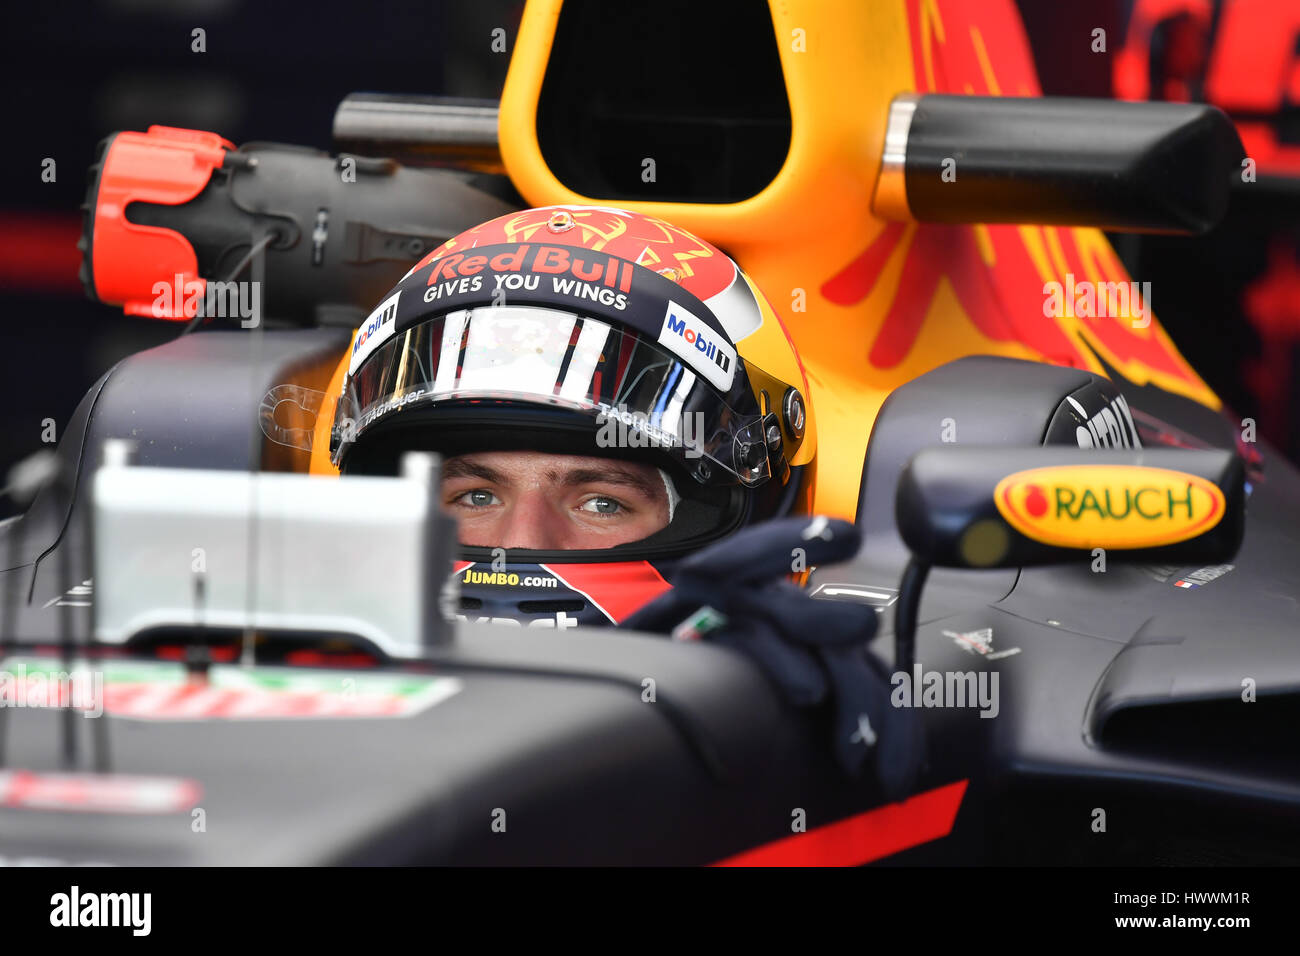 Albert Park, Melbourne, Australia. 24th Mar, 2017. Max Verstappen (NDL) #33 from the Red Bull Racing team waits in his car for practice session two at the 2017 Australian Formula One Grand Prix at Albert Park, Melbourne, Australia. Sydney Low/Cal Sport Media/Alamy Live News Stock Photo